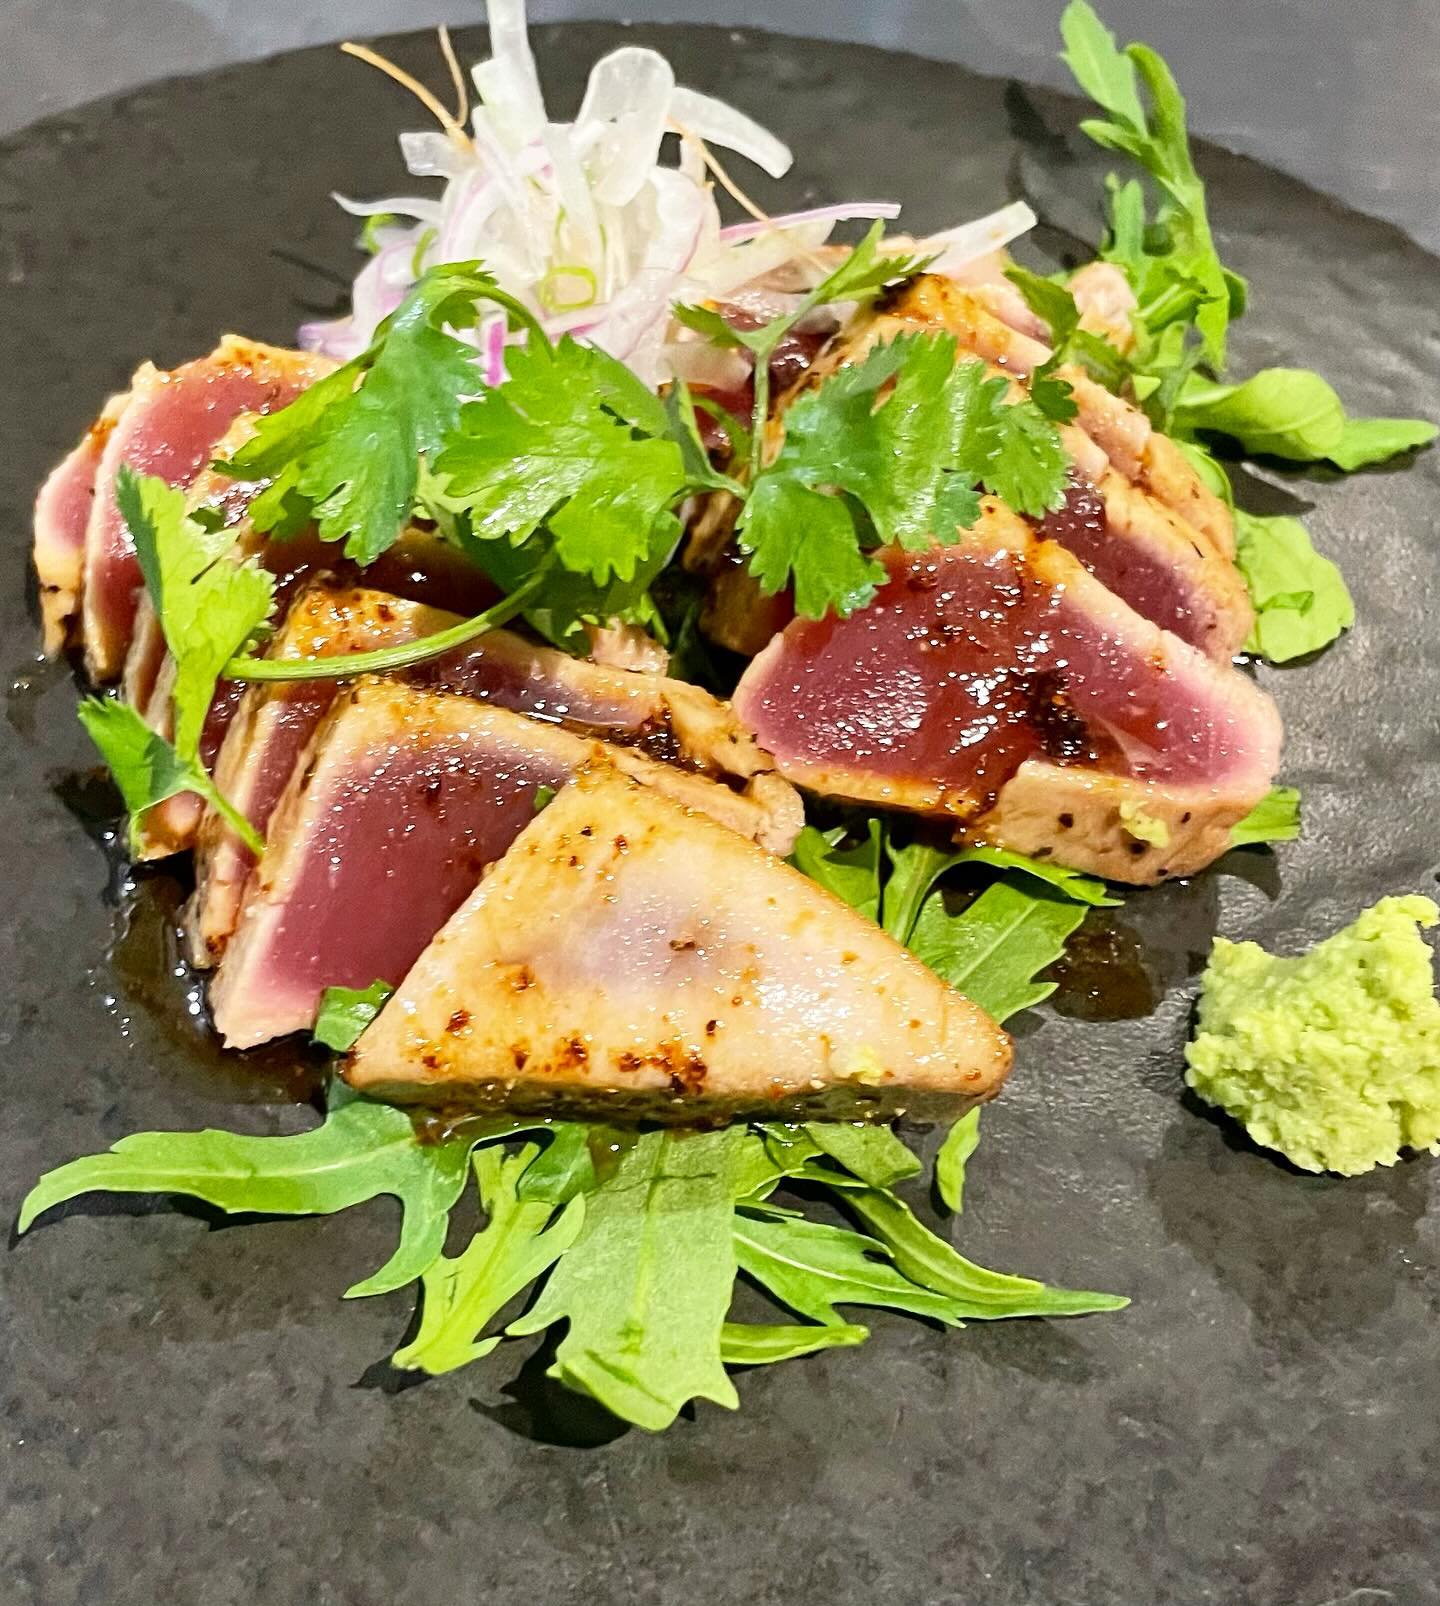 Chef’s next fish special is Rare grilled Yellowfin tuna ,
Butter soy vinegar.